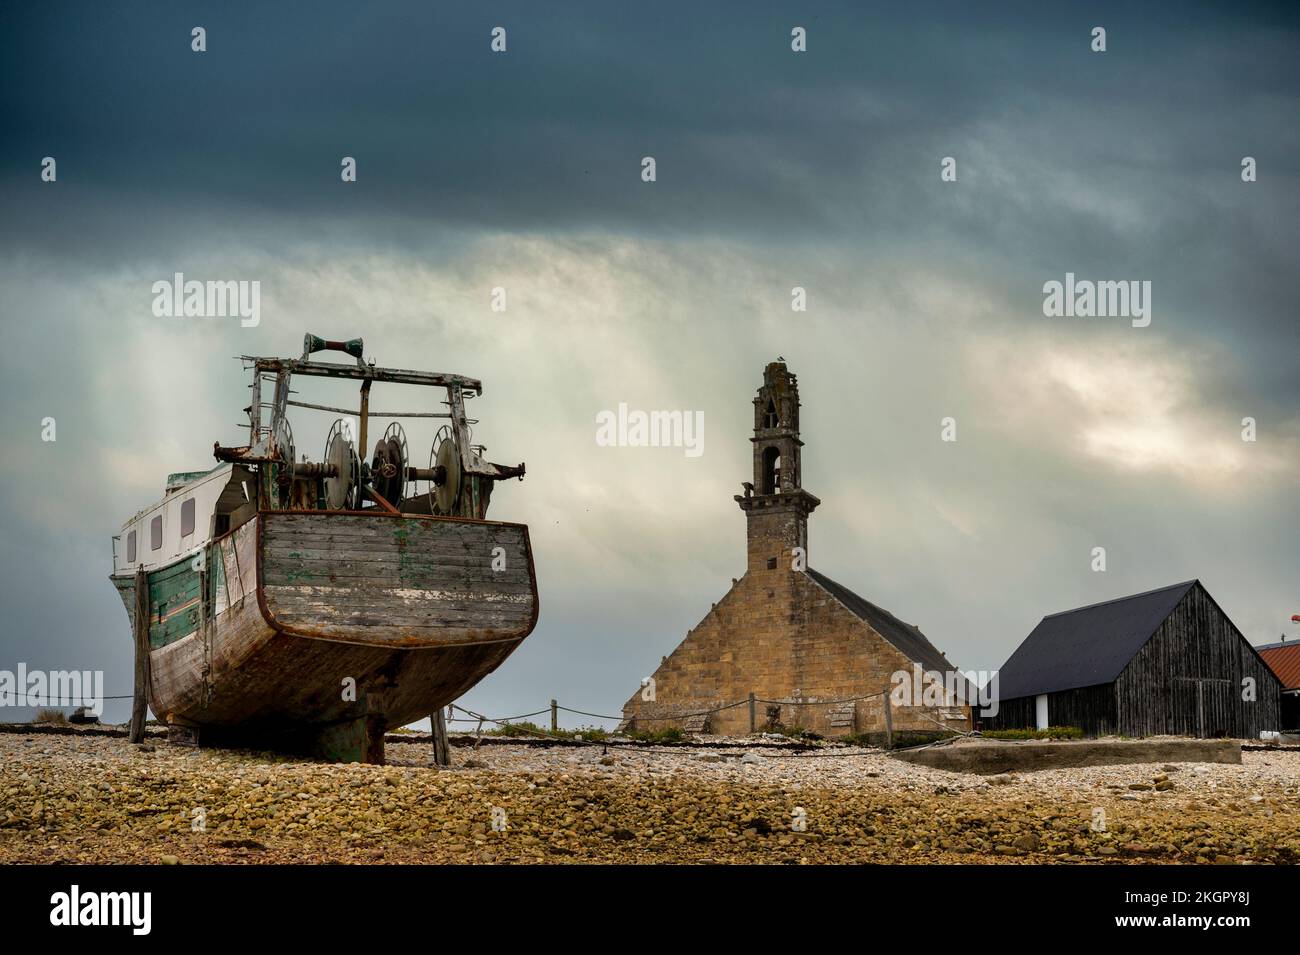 France, Brittany, Camaret-sur-Mer, Trawler in ship cemetery with Chapelle Notre-Dame-De-Rocamadour in background Stock Photo